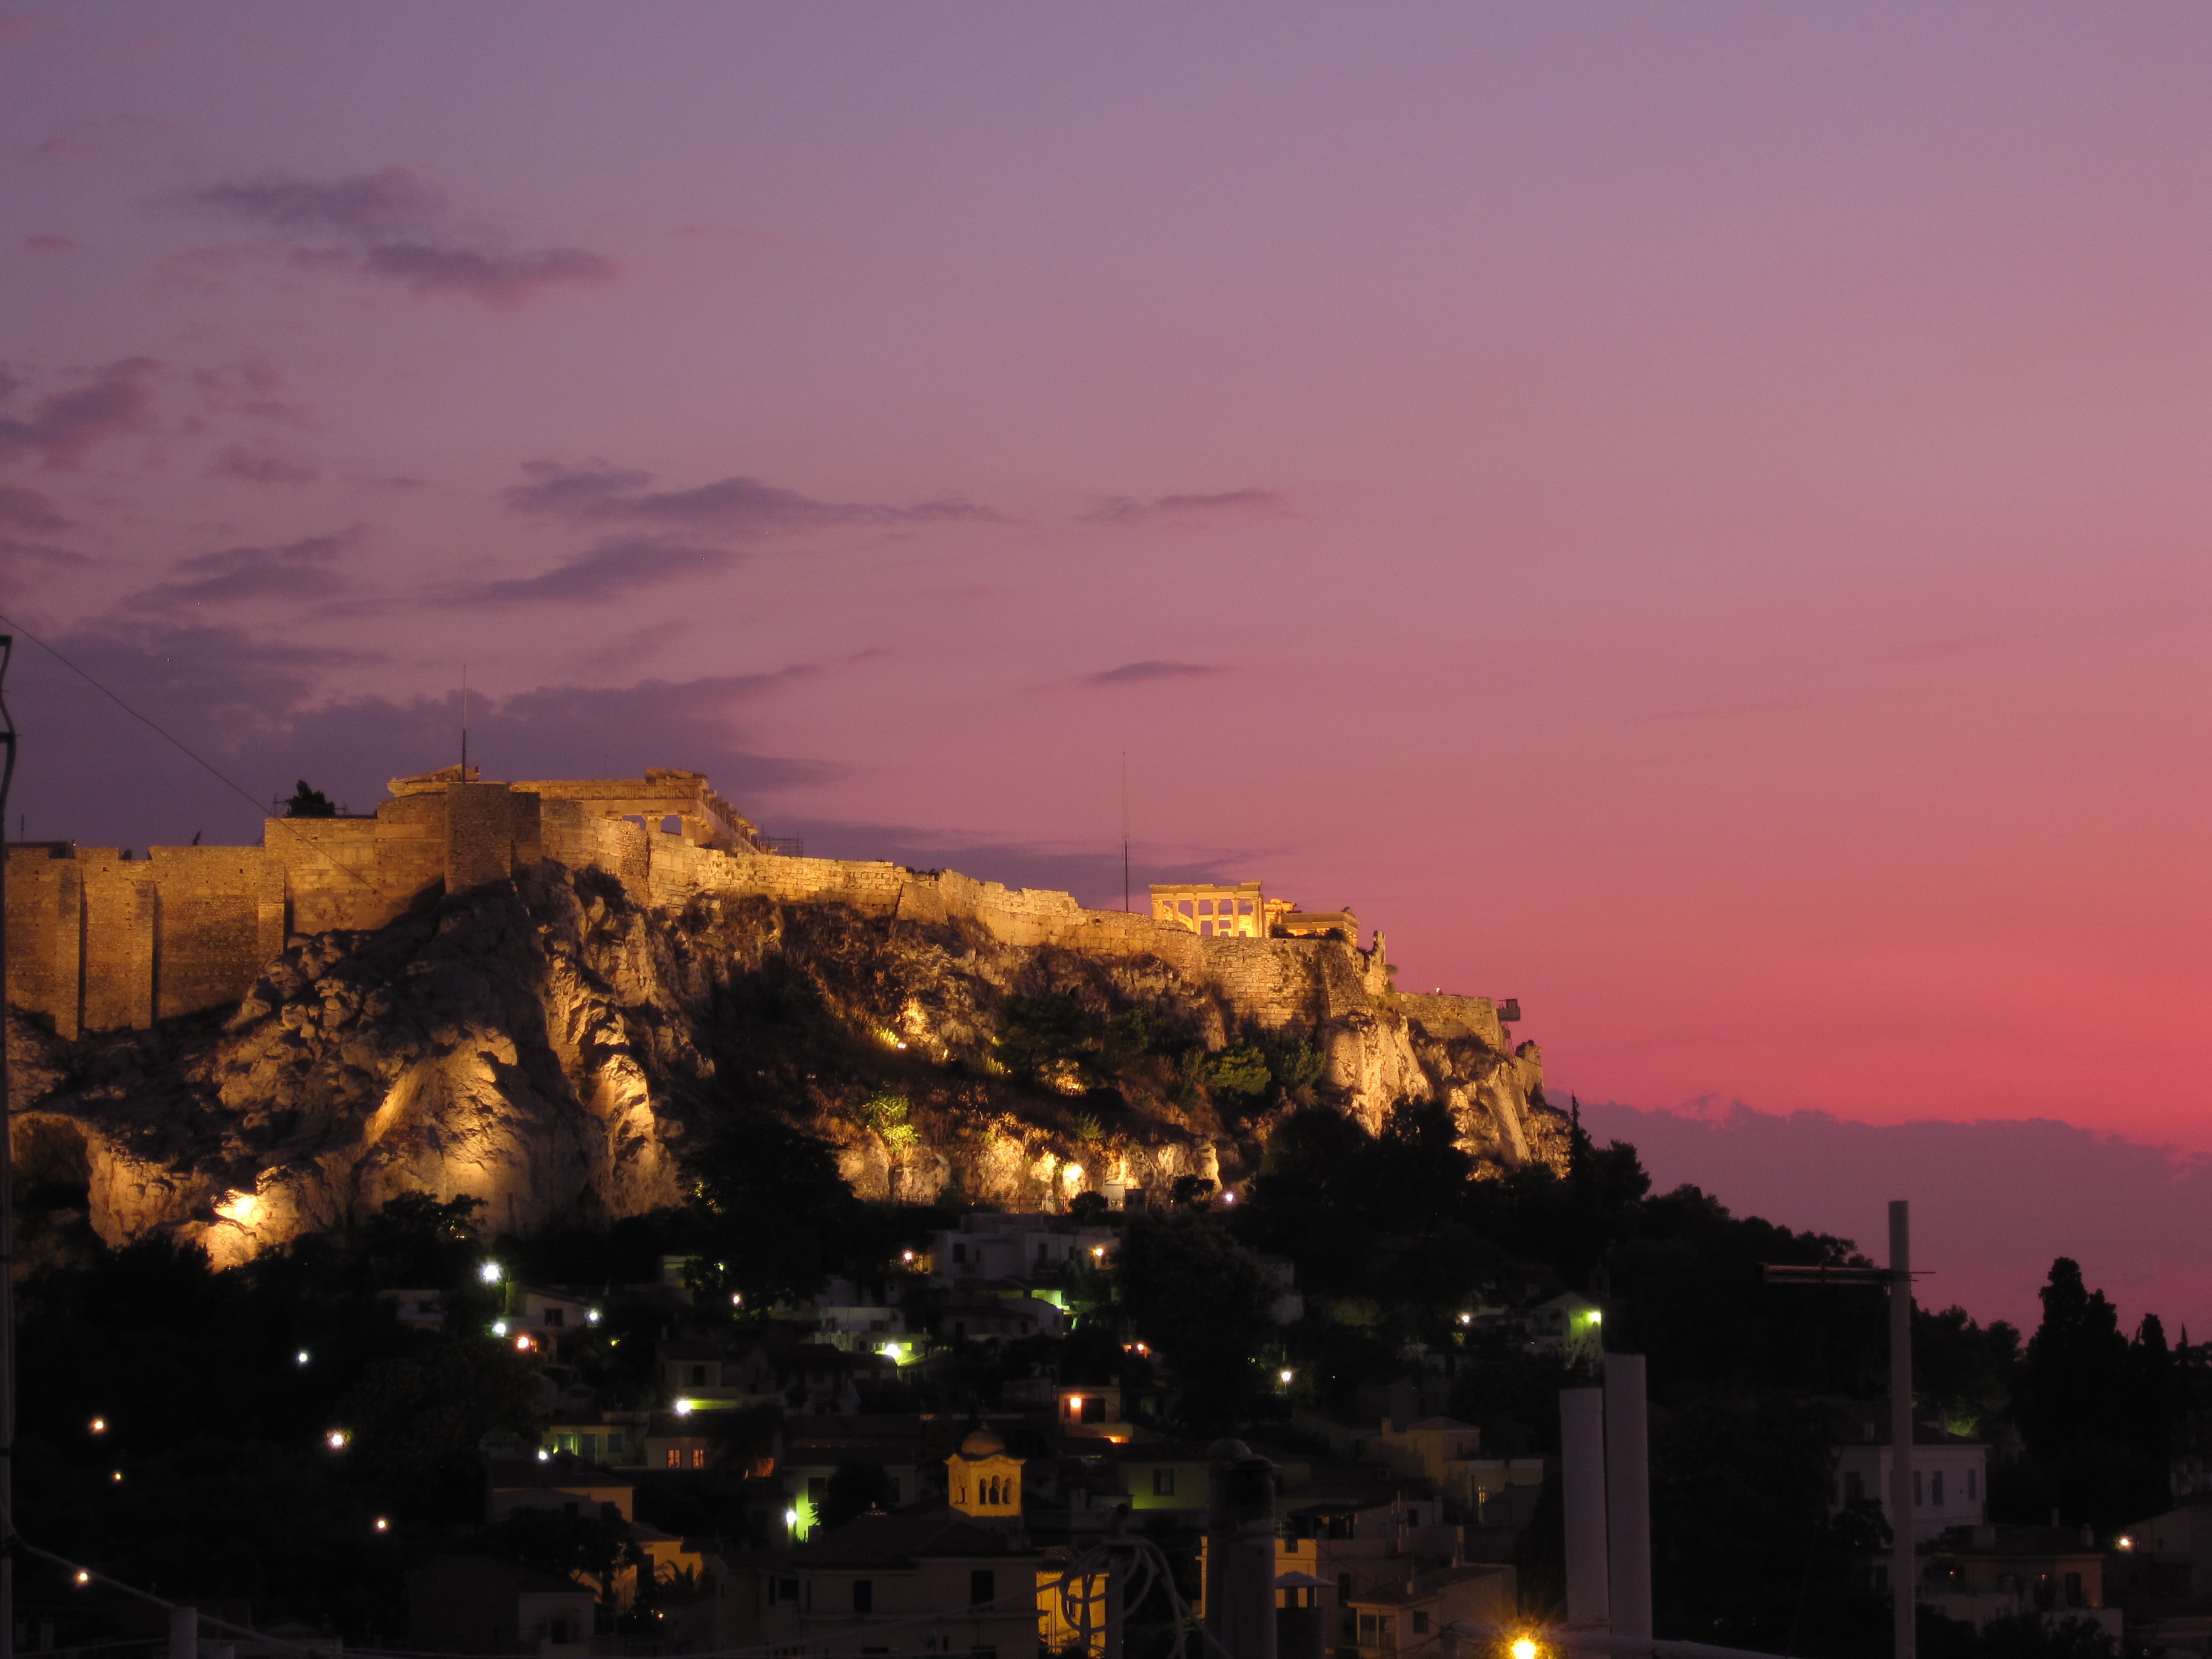 The Akropolis of Athens